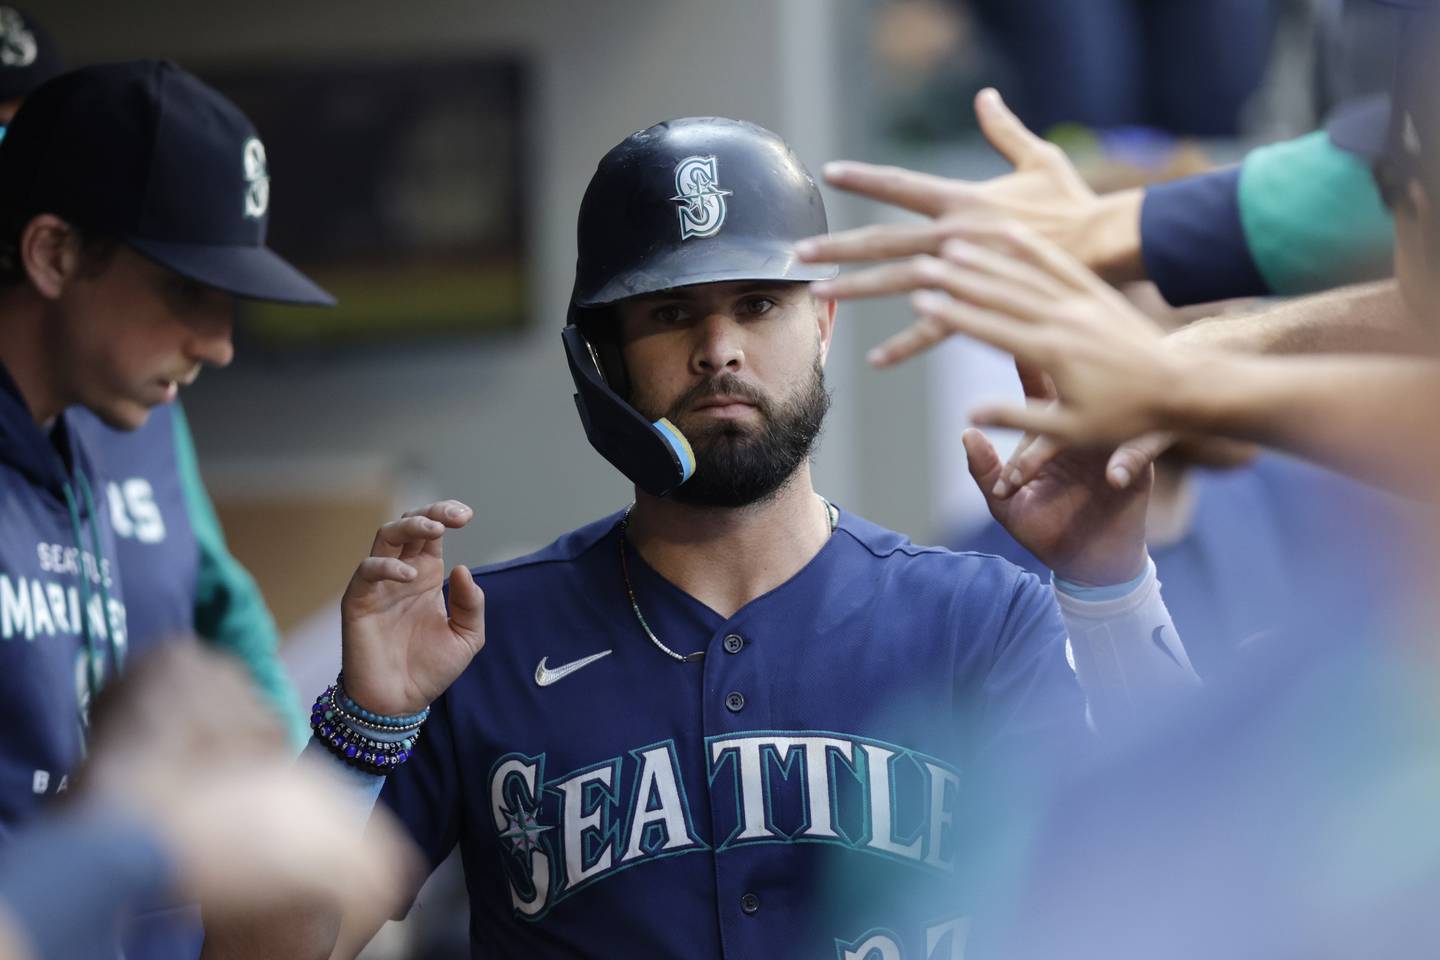 The Mariners' Jesse Winker is congratulated in the dugout after scoring against the Athletics during the eighth inning on Oct. 1, 2022.